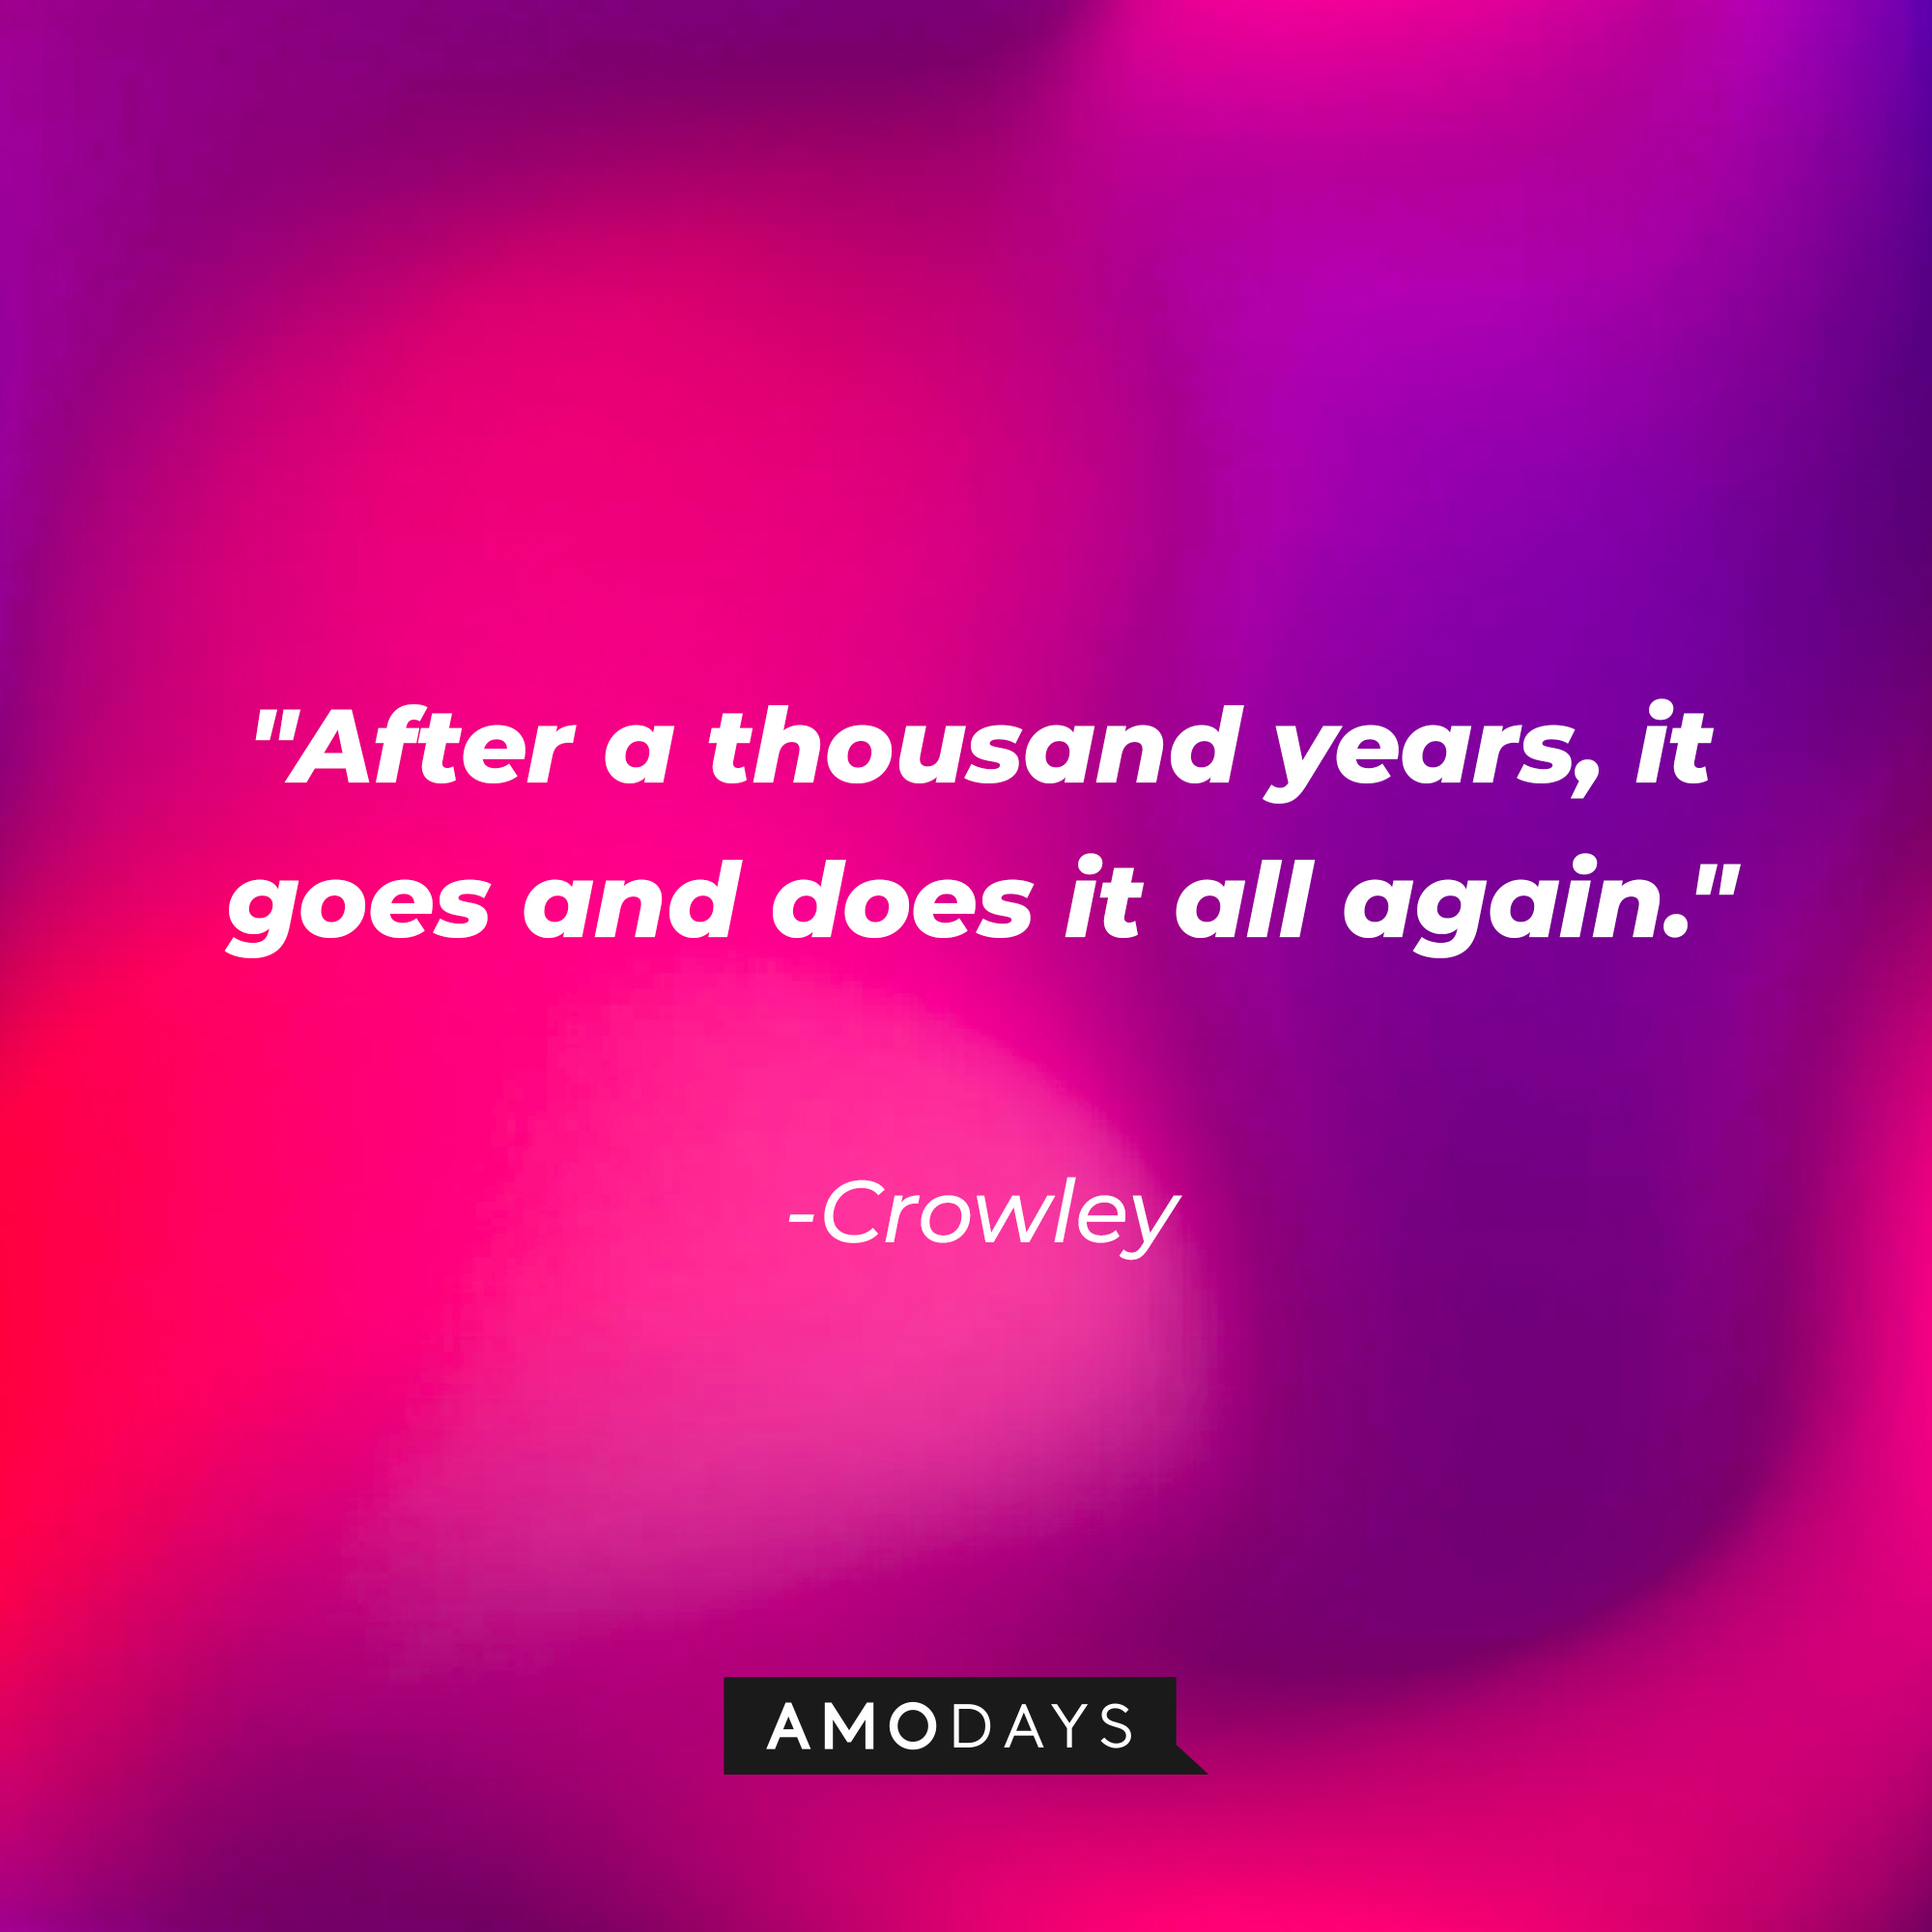 Crowley's quote: "After a thousand years, it goes and does it all again." | Source: AmoDays